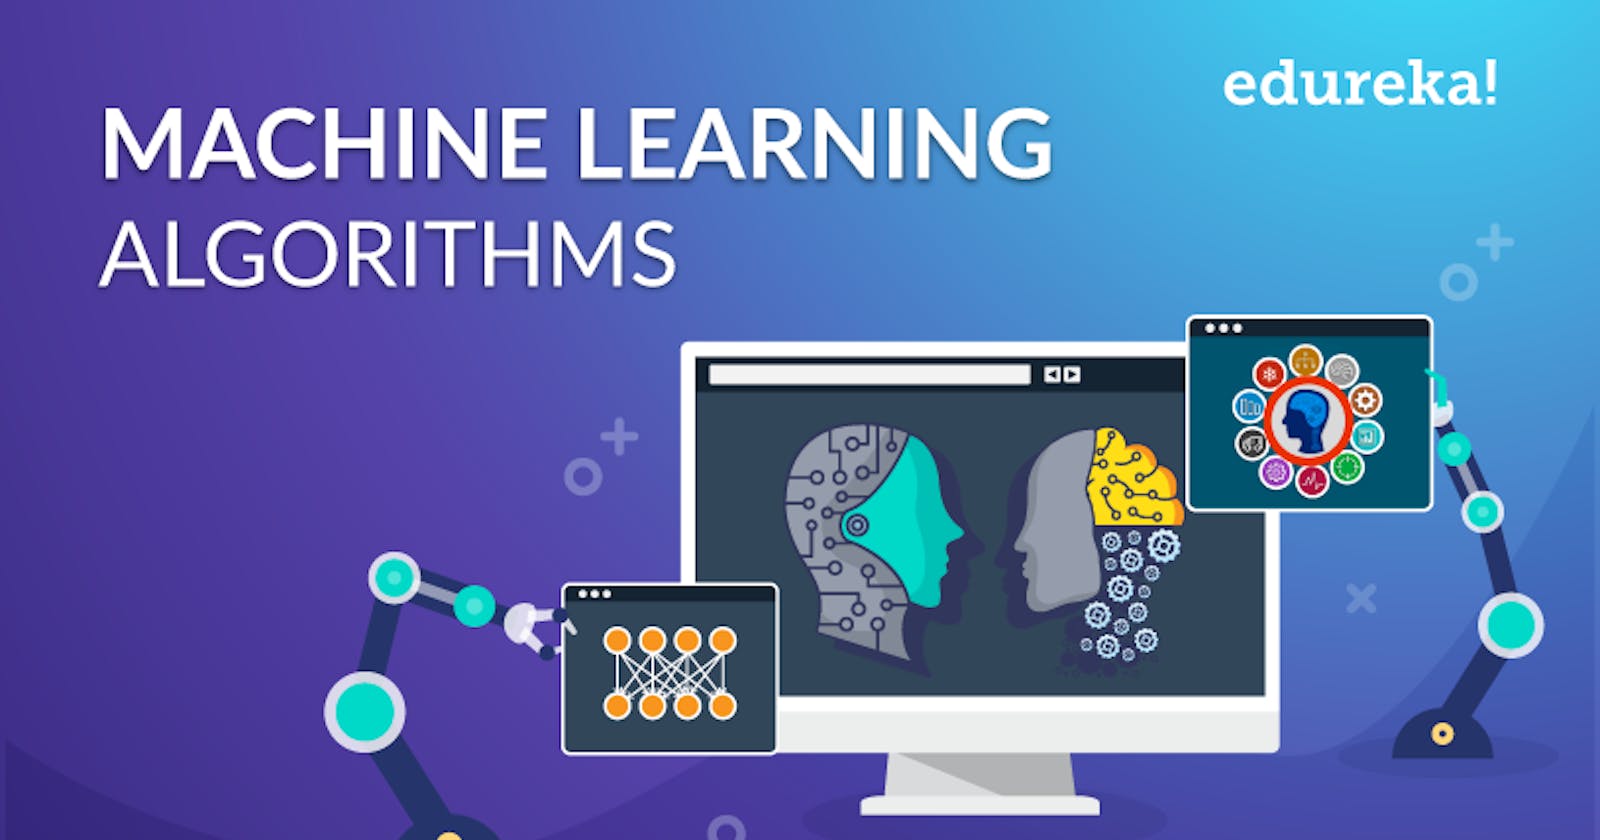 An explanation of the various machine learning algorithms and the uses for them.